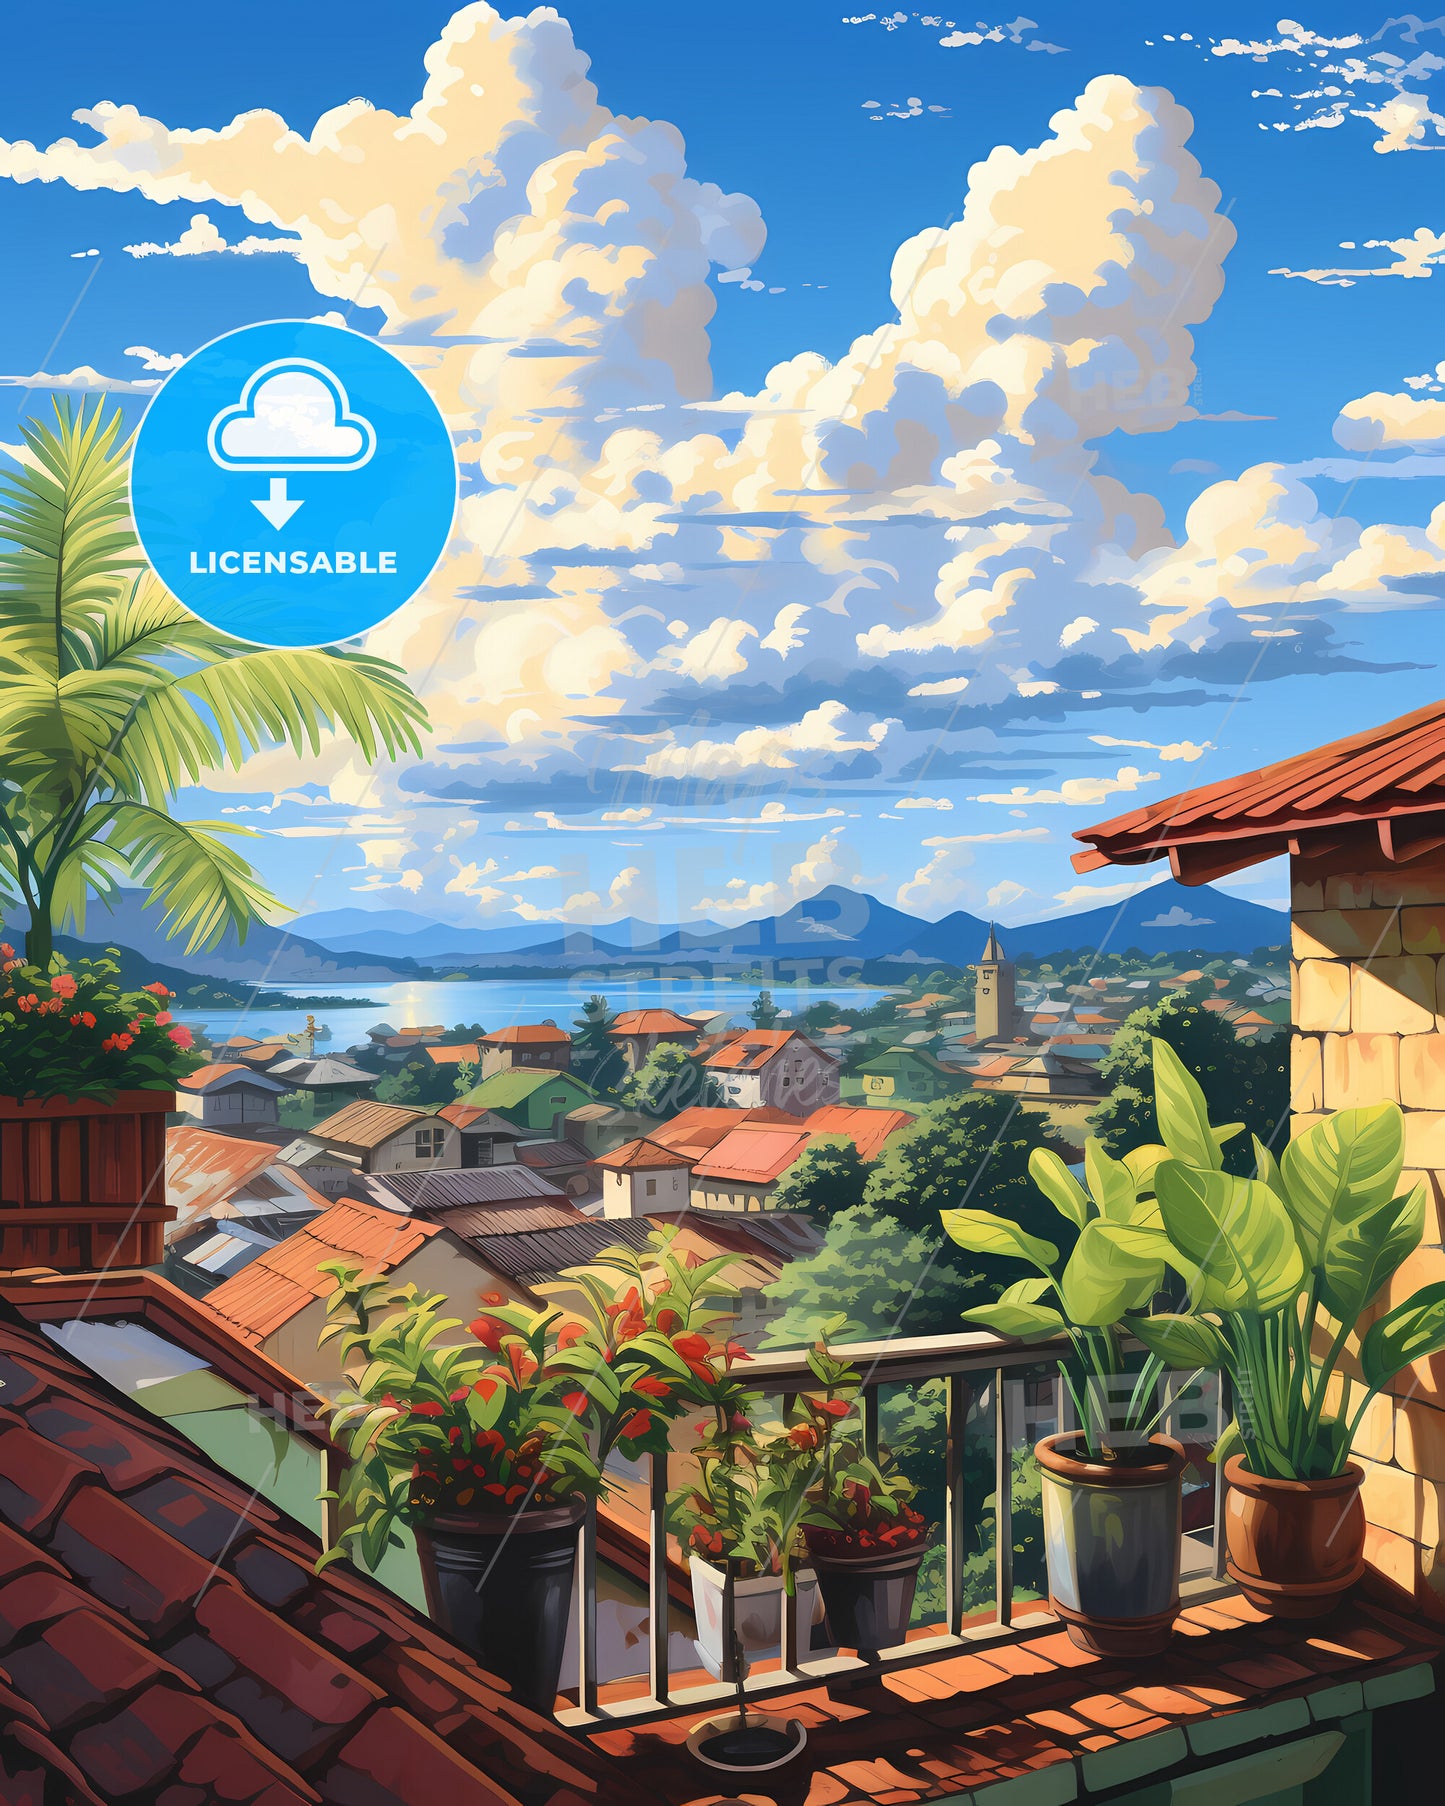 On The Roof Of Seychelles, Republic Of Seychelles - A View Of A Town From A Balcony